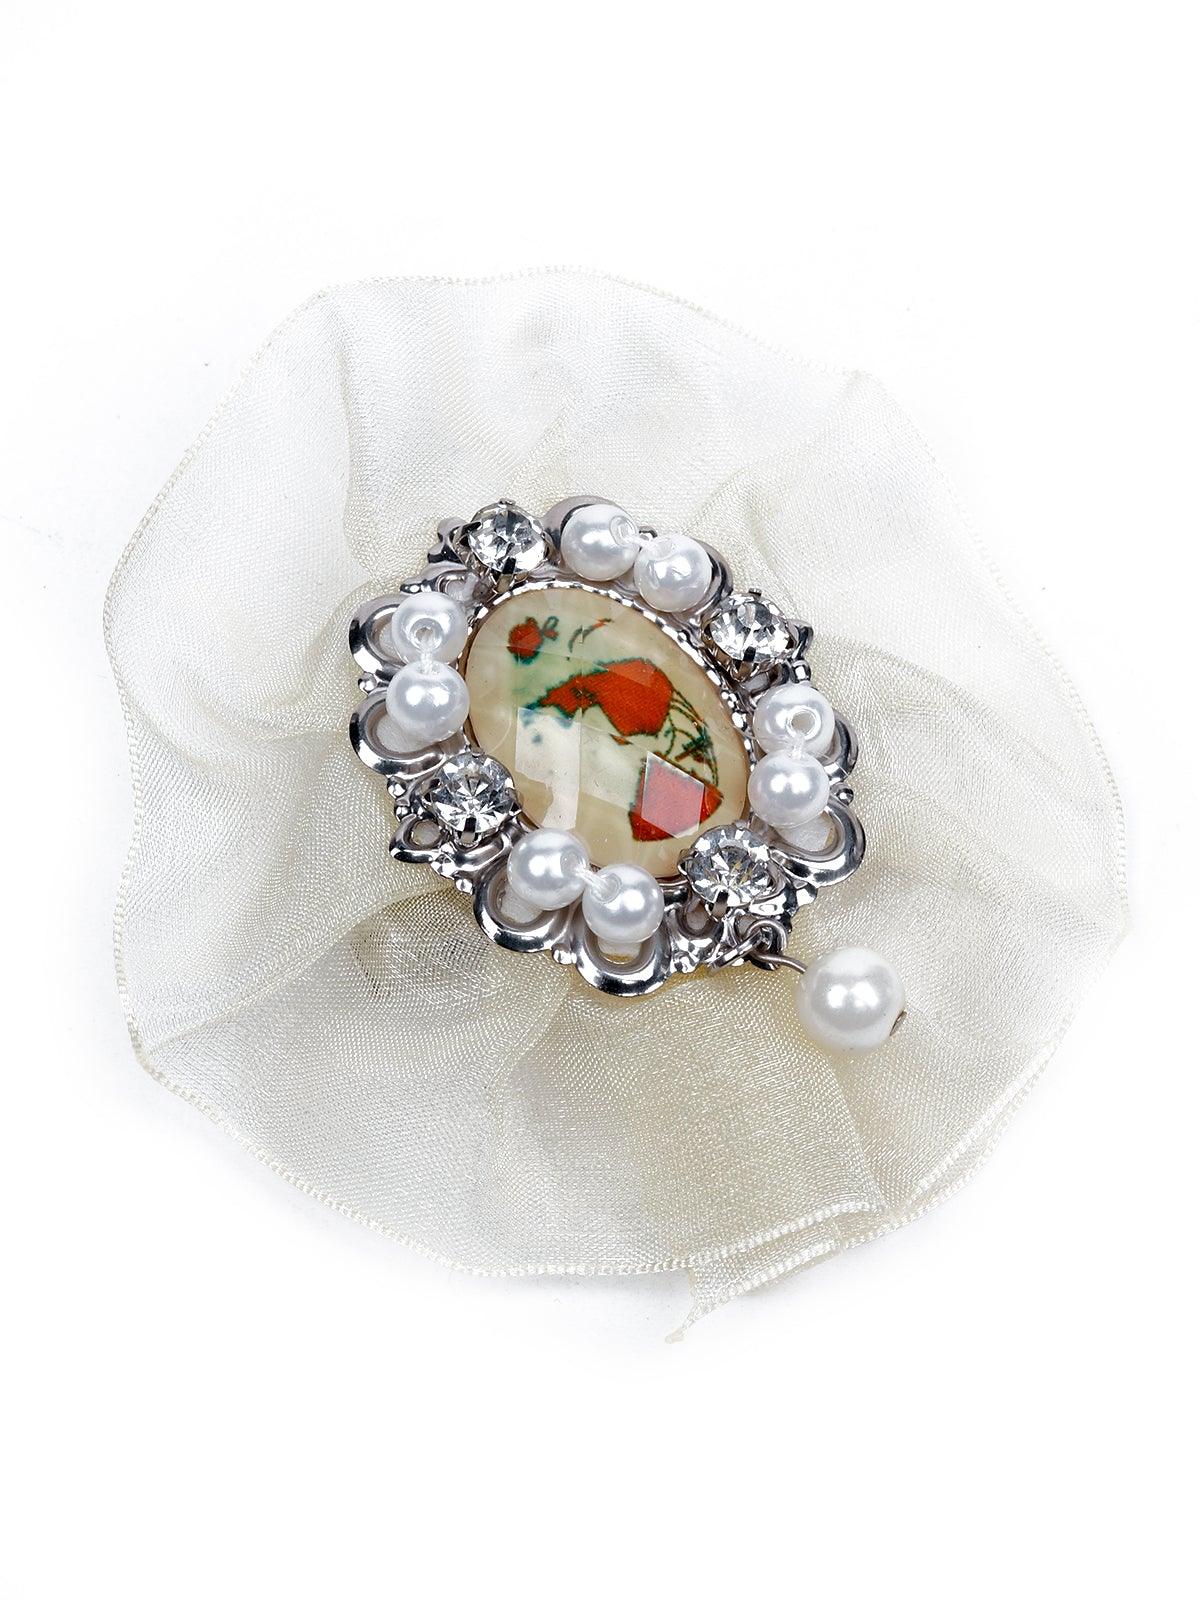 Fairly White Pleated Rose-Shaped Brooch - Odette